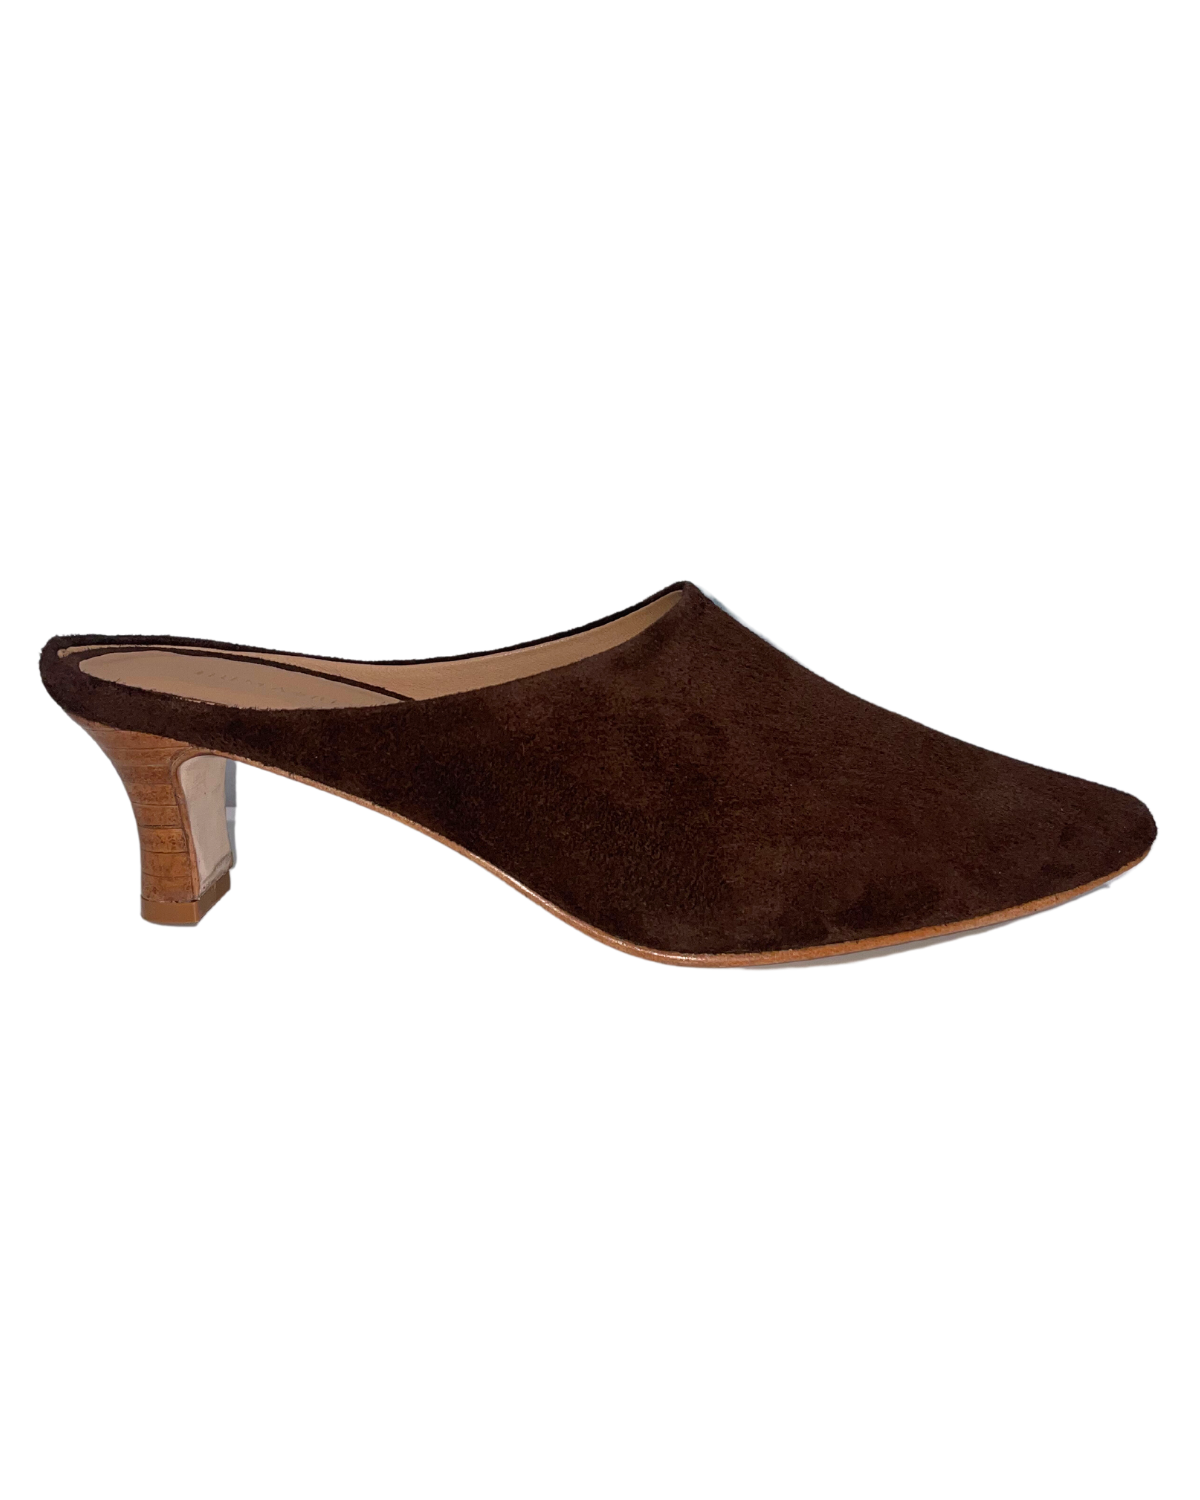 Dorothy Pointed Toe Mule (Chocolate Suede)